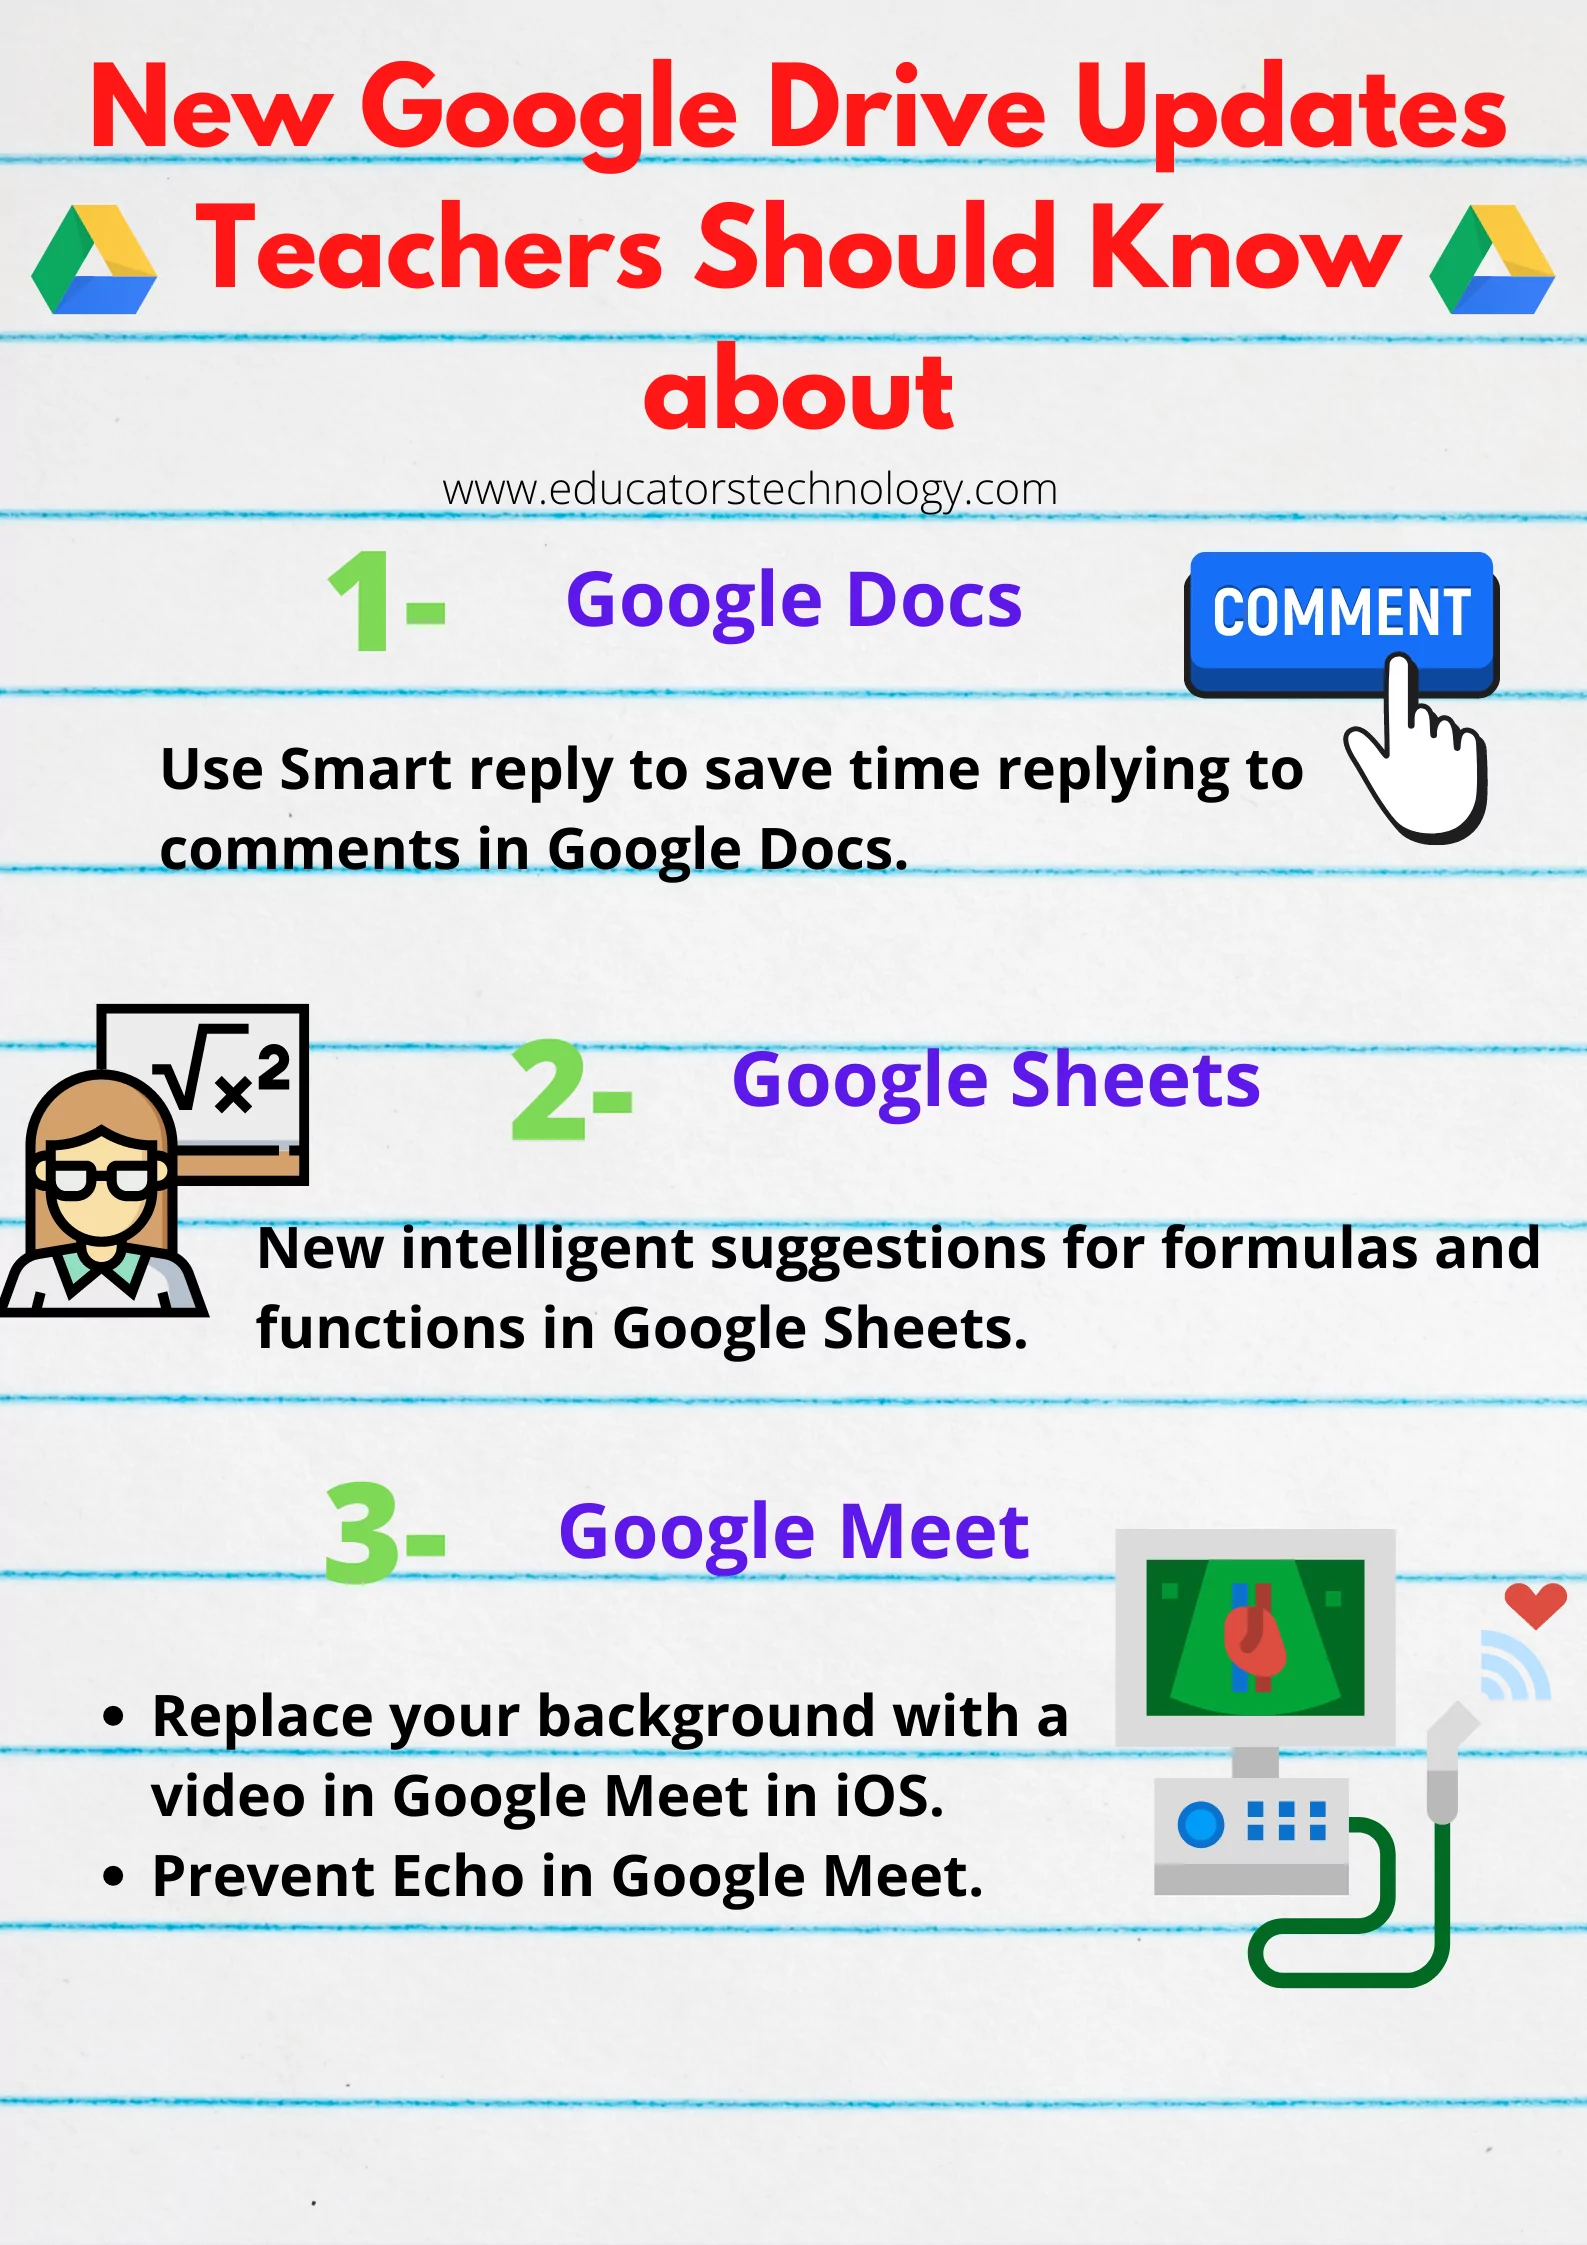 New Google Drive updates teachers should know about